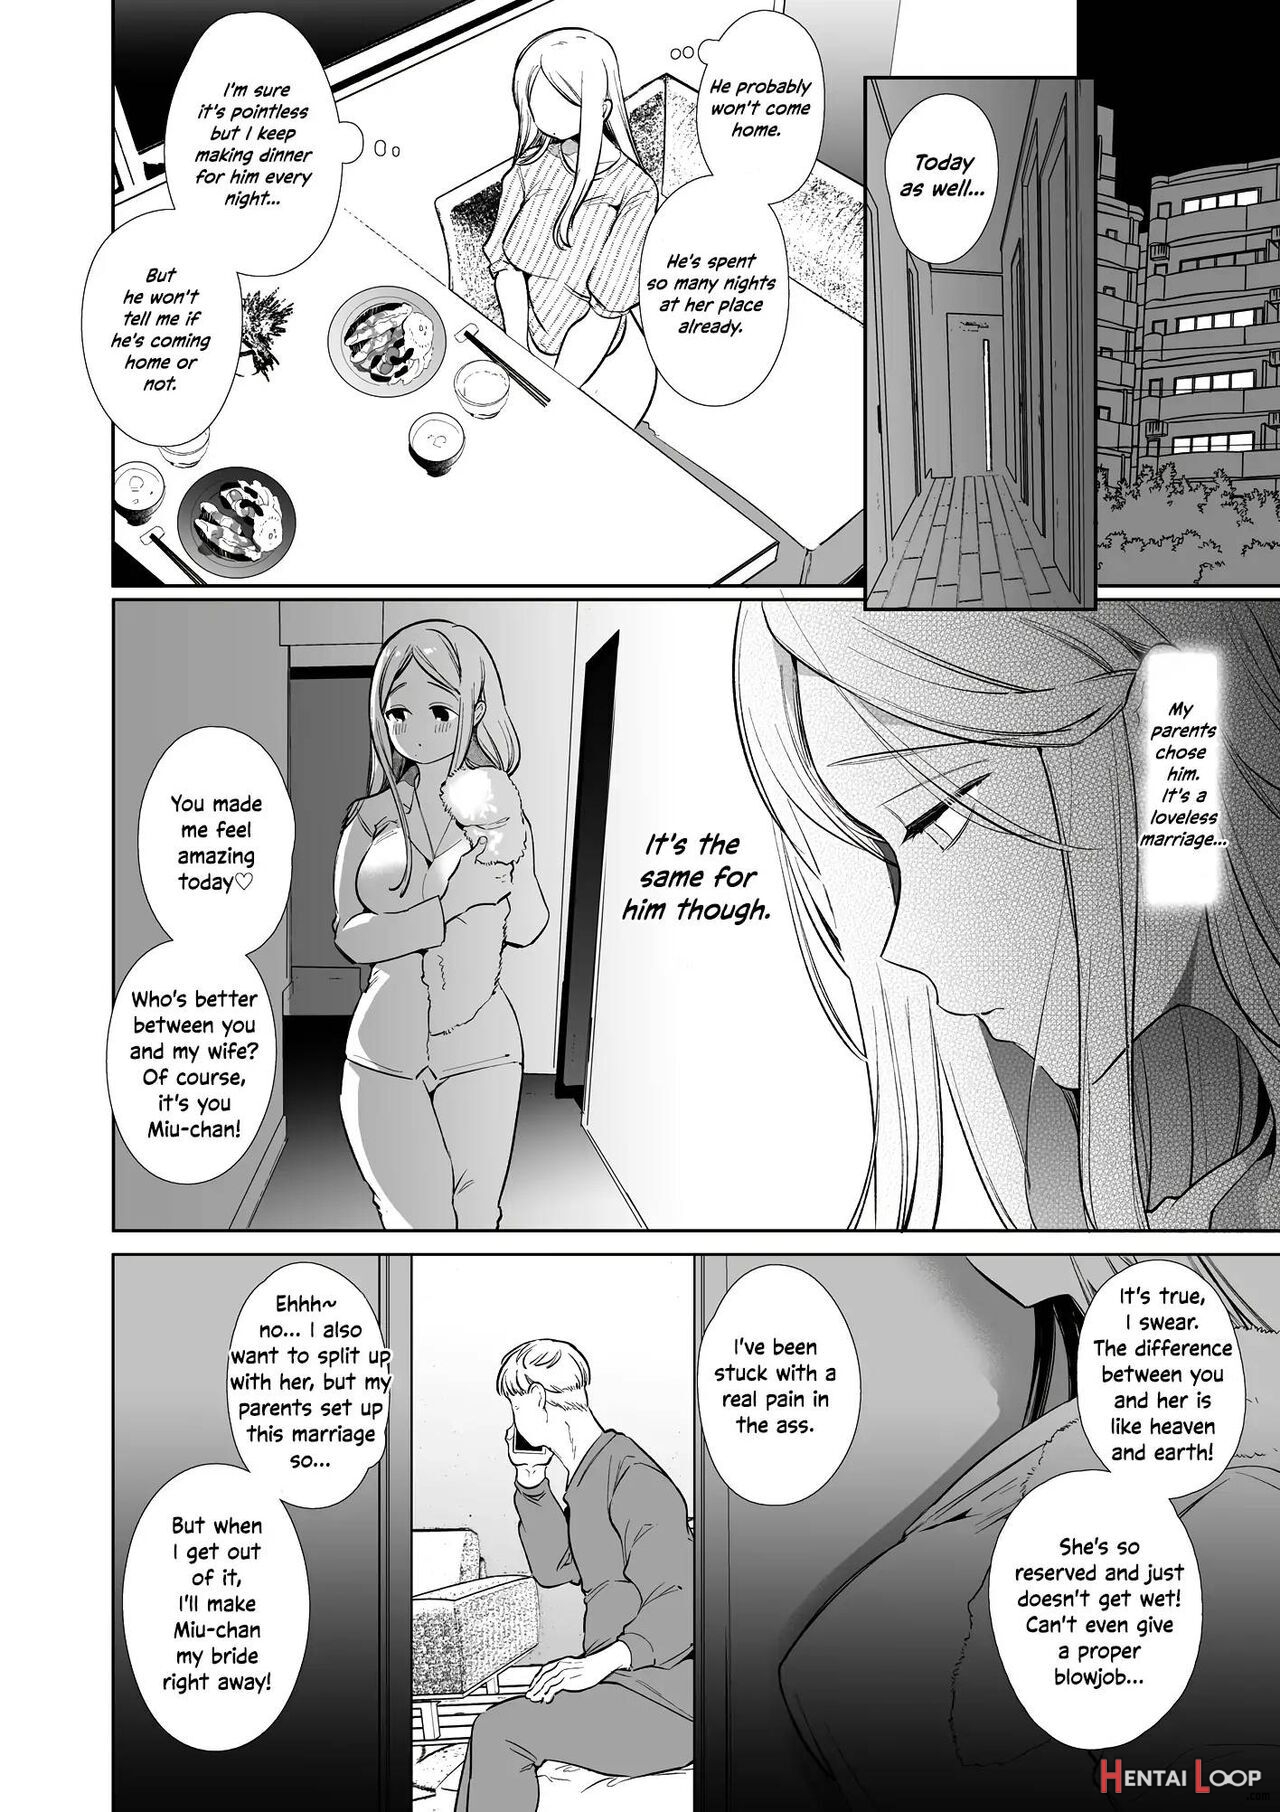 Kana-san Ntr ~ Degradation Of A Housewife By A Guy In An Alter Account ~ – Decensored page 5